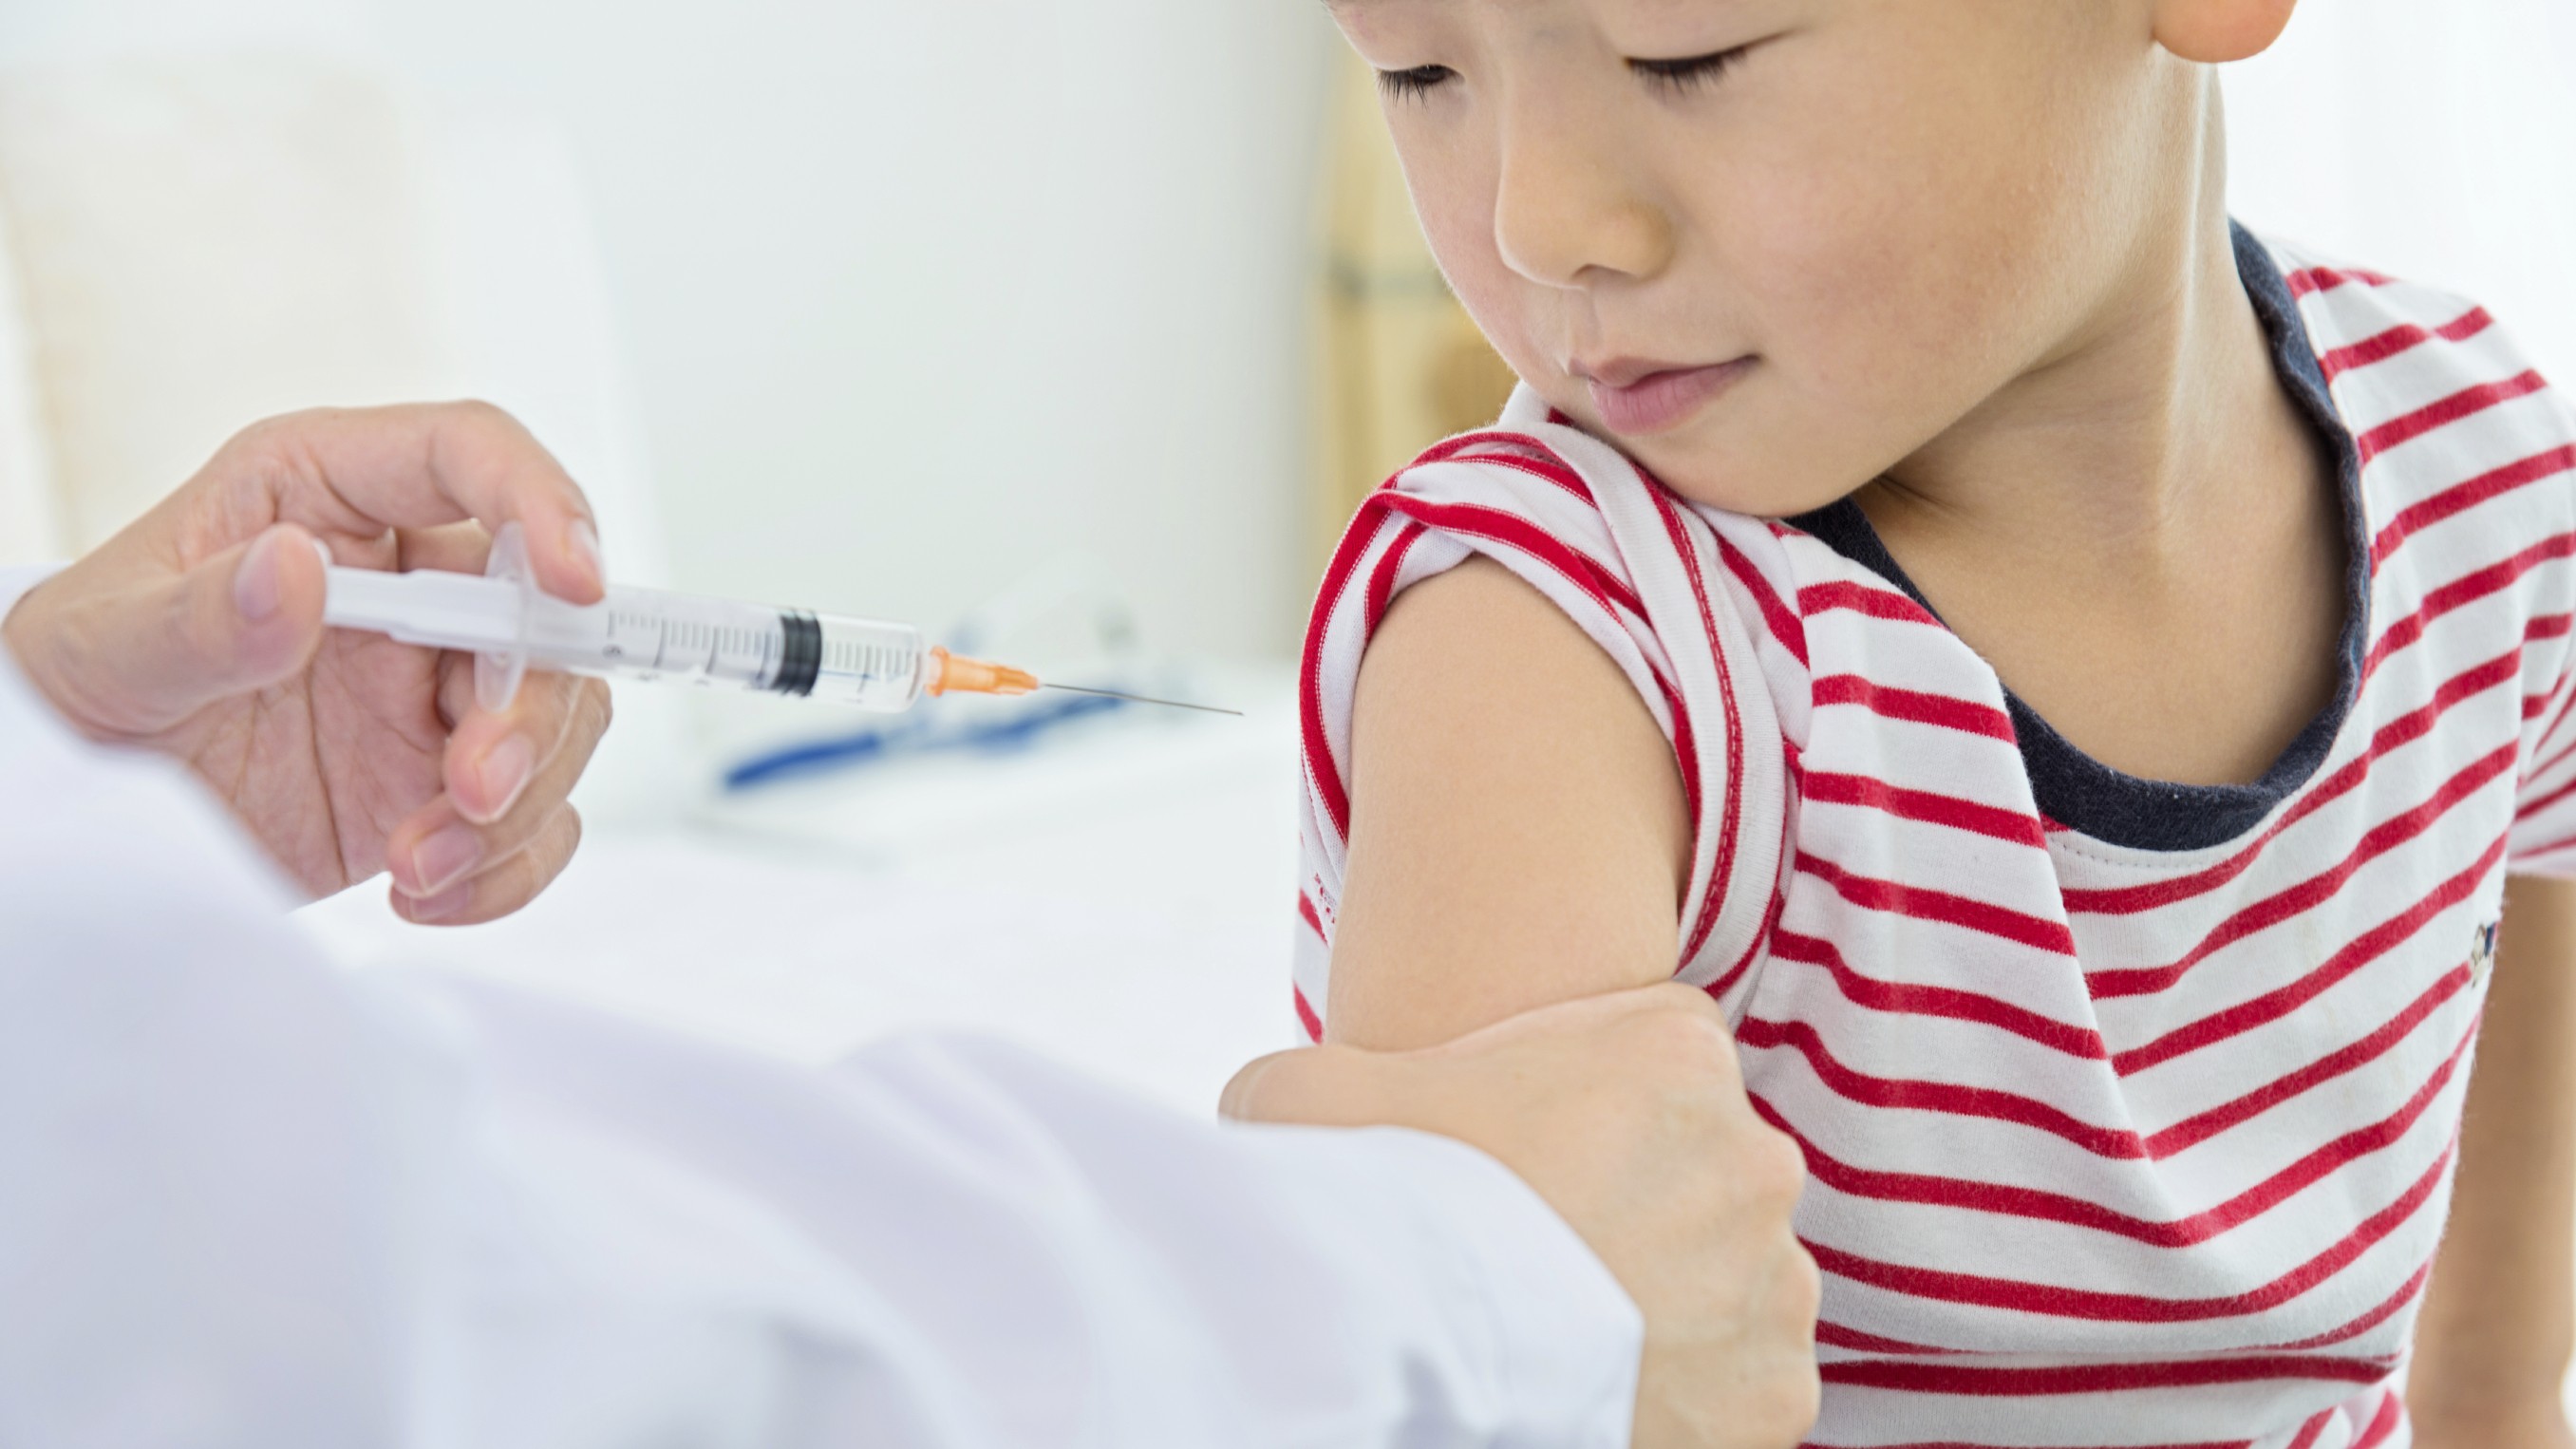 I Rolled My Eyes at Parents Who Said Vaccines Caused Their Kids’ Autism